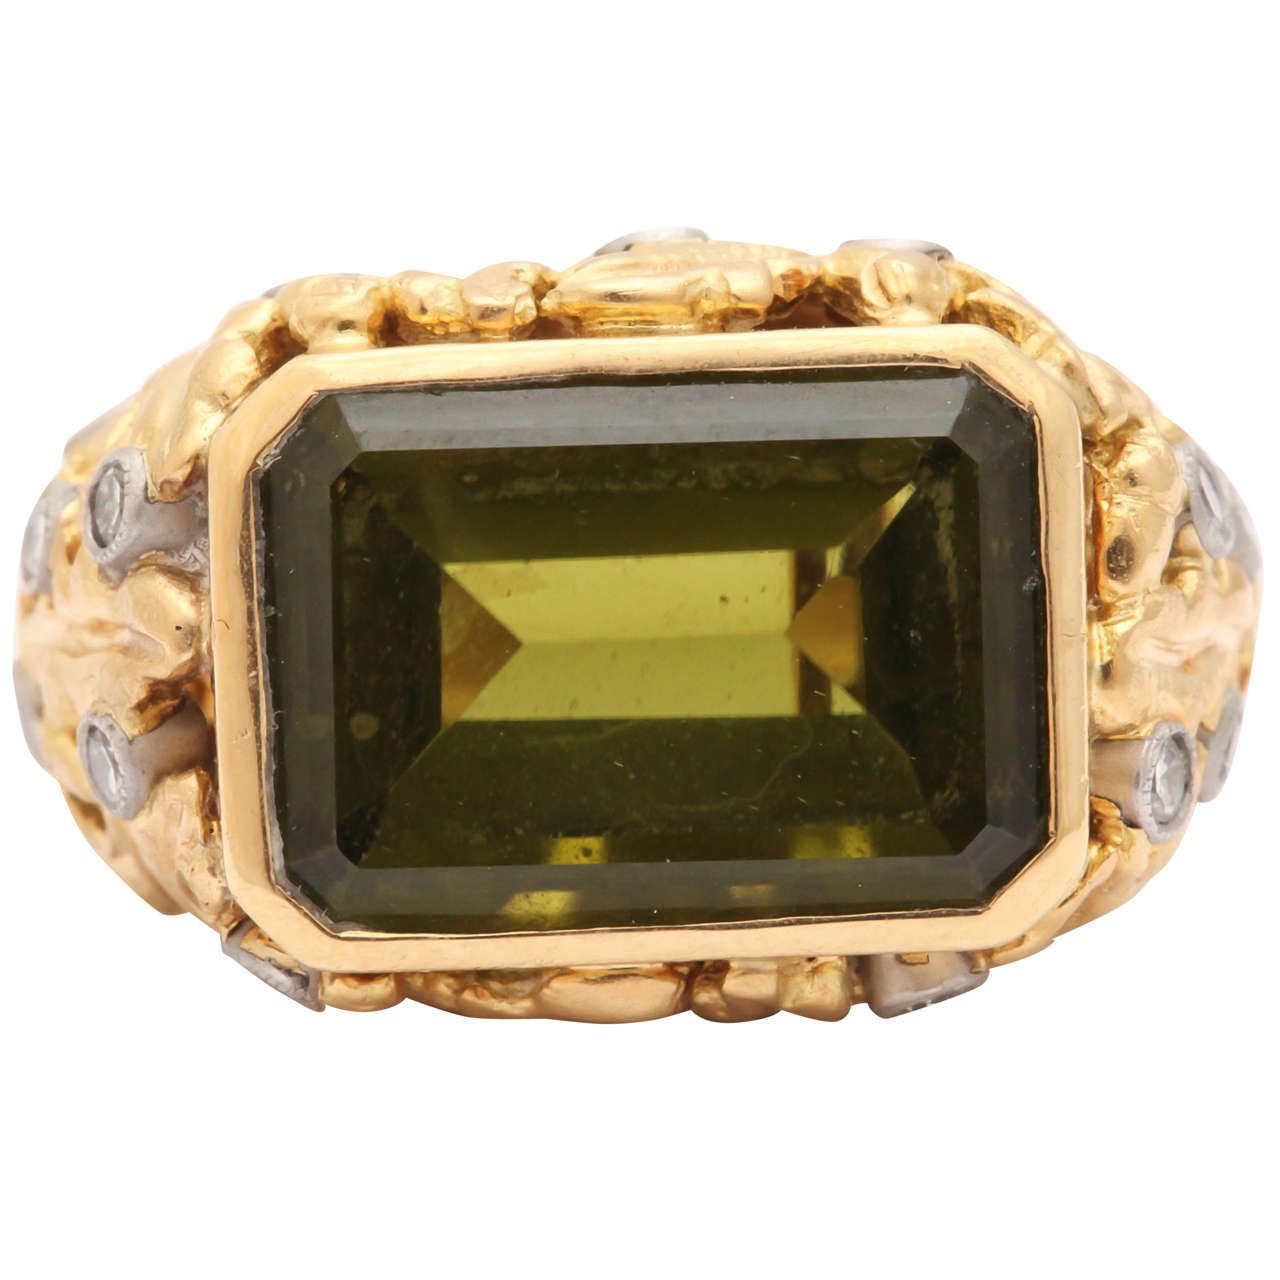 This fine gemstone is a true Olivine, very rare in larger sizes. It is a wonderful color like the  best extra virgin olive oil. The more common peridot is a form of olivine but lighter in color. The stone is a striking emerald cut and is 11 cts ,